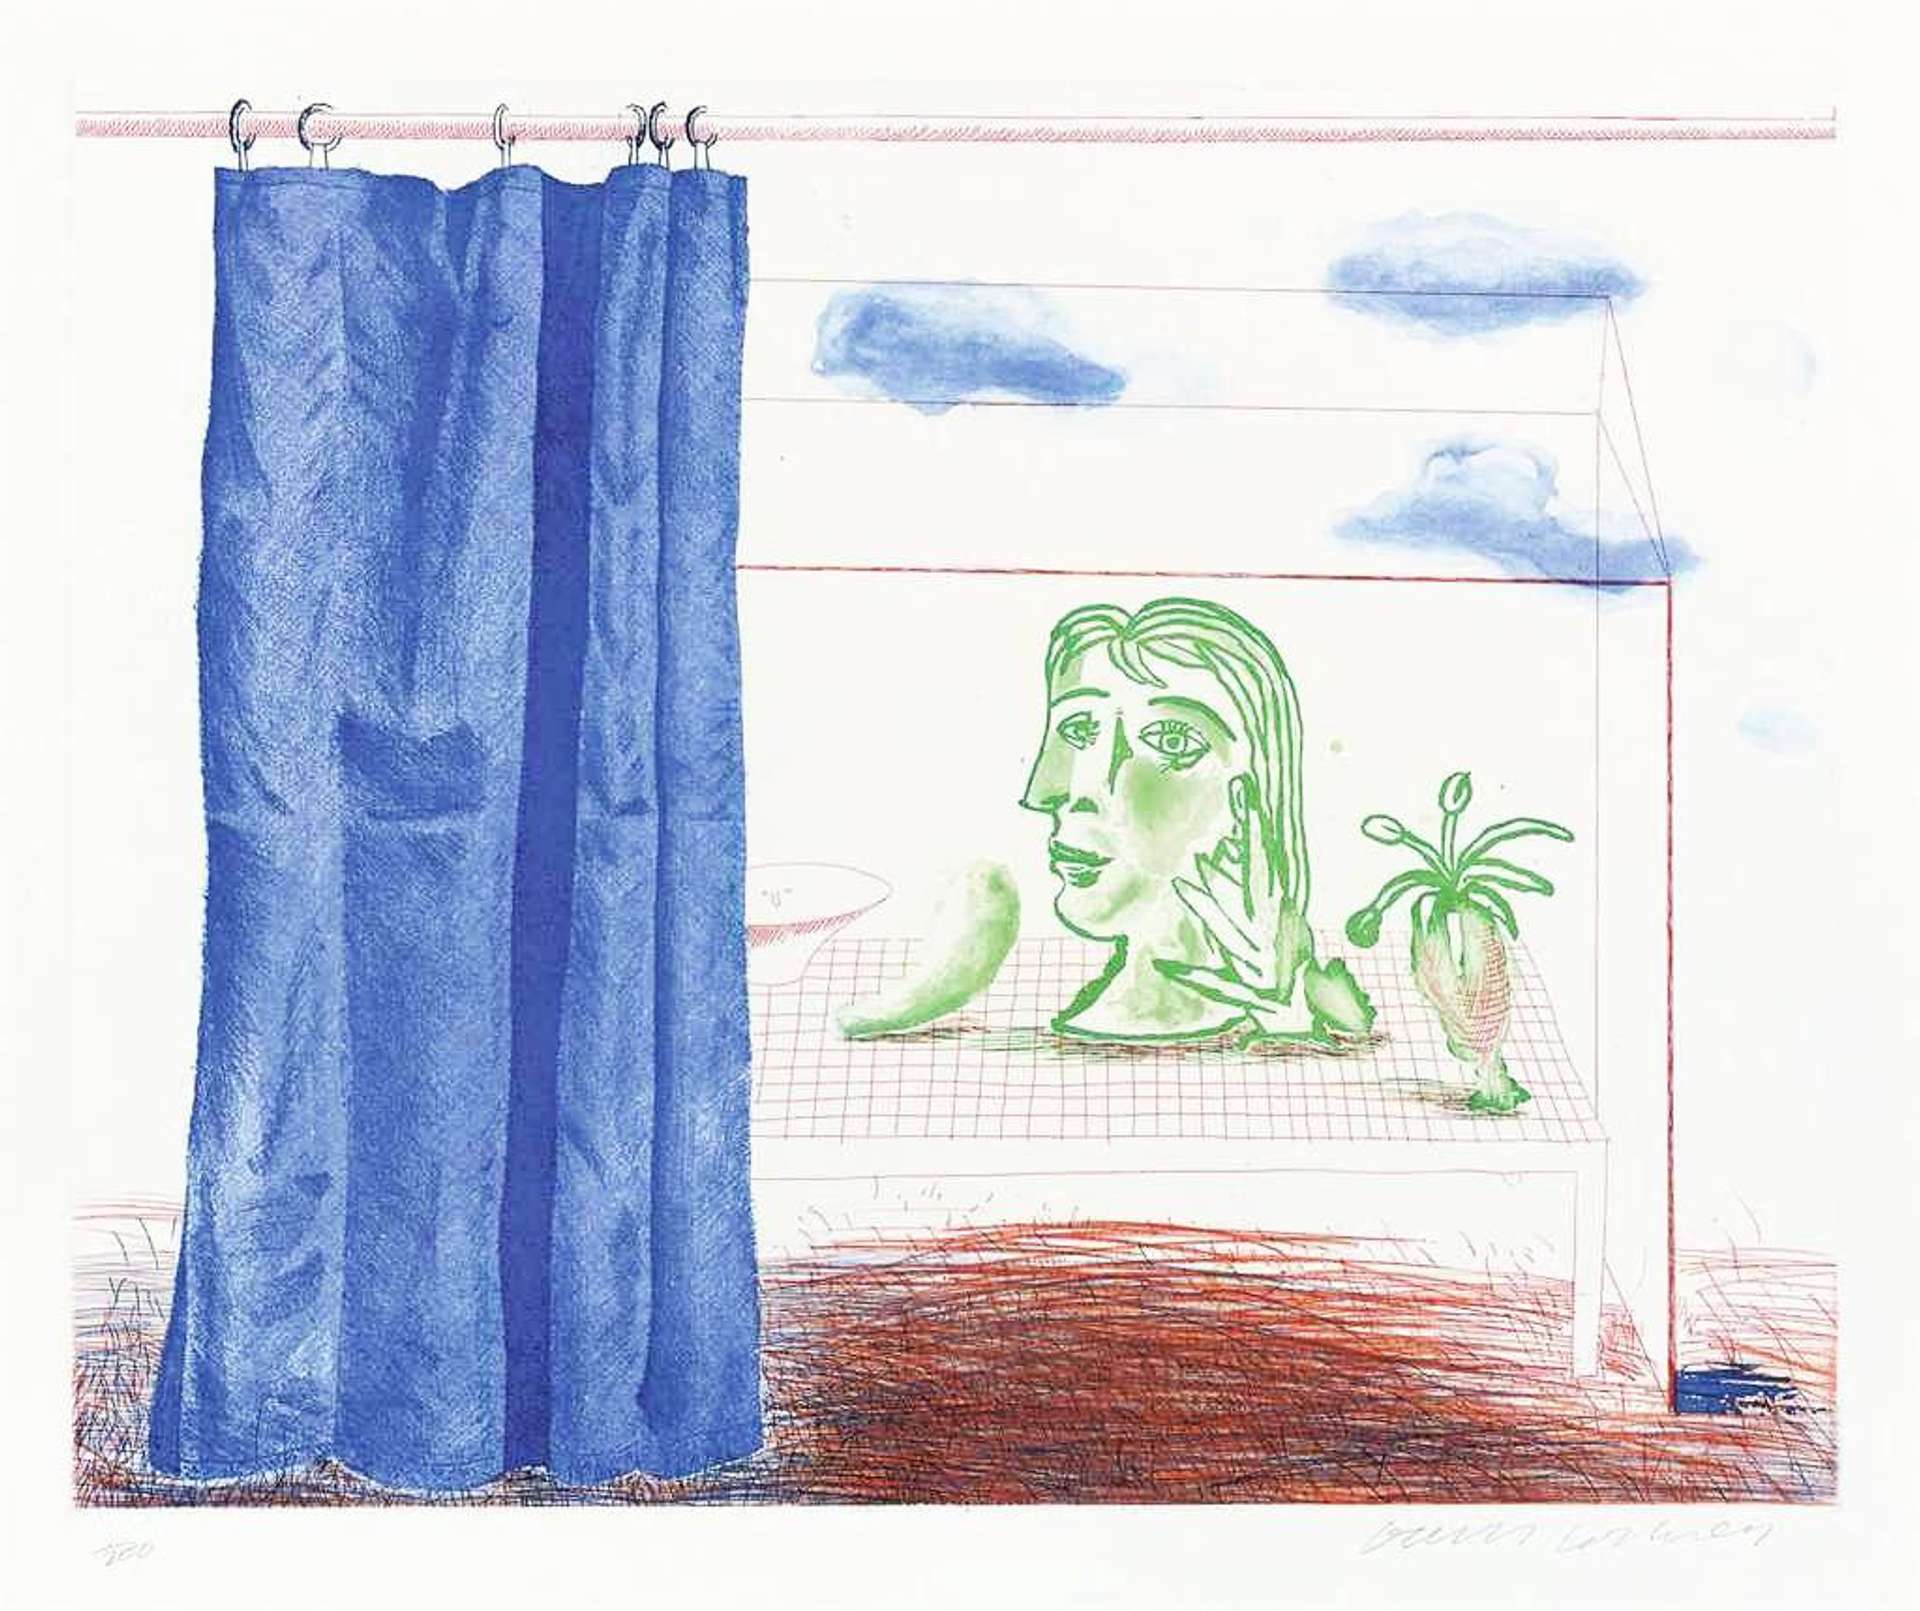 David Hockney’s What Is This Picasso. An intaglio print of a green Cubist style painting of a woman’s head inside of a shower with a blue curtain and visible clouds above the subject. 